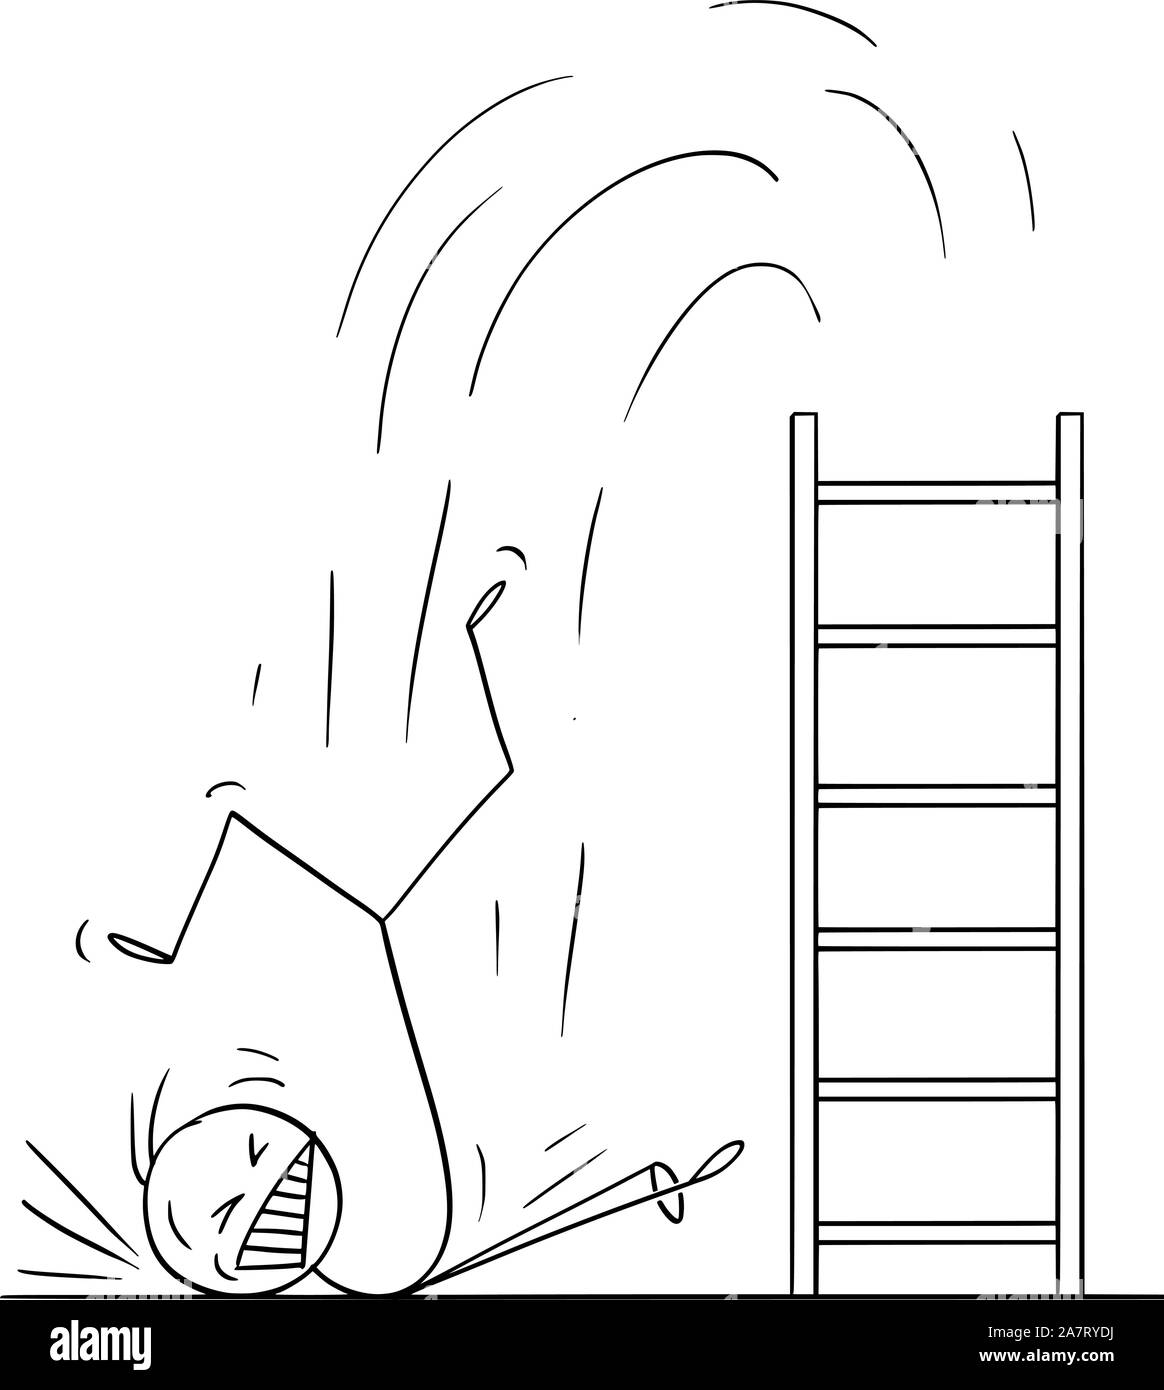 Vector cartoon stick figure drawing conceptual illustration of man or businessman falling hard from ladder. Business or career concept of failure. Stock Vector